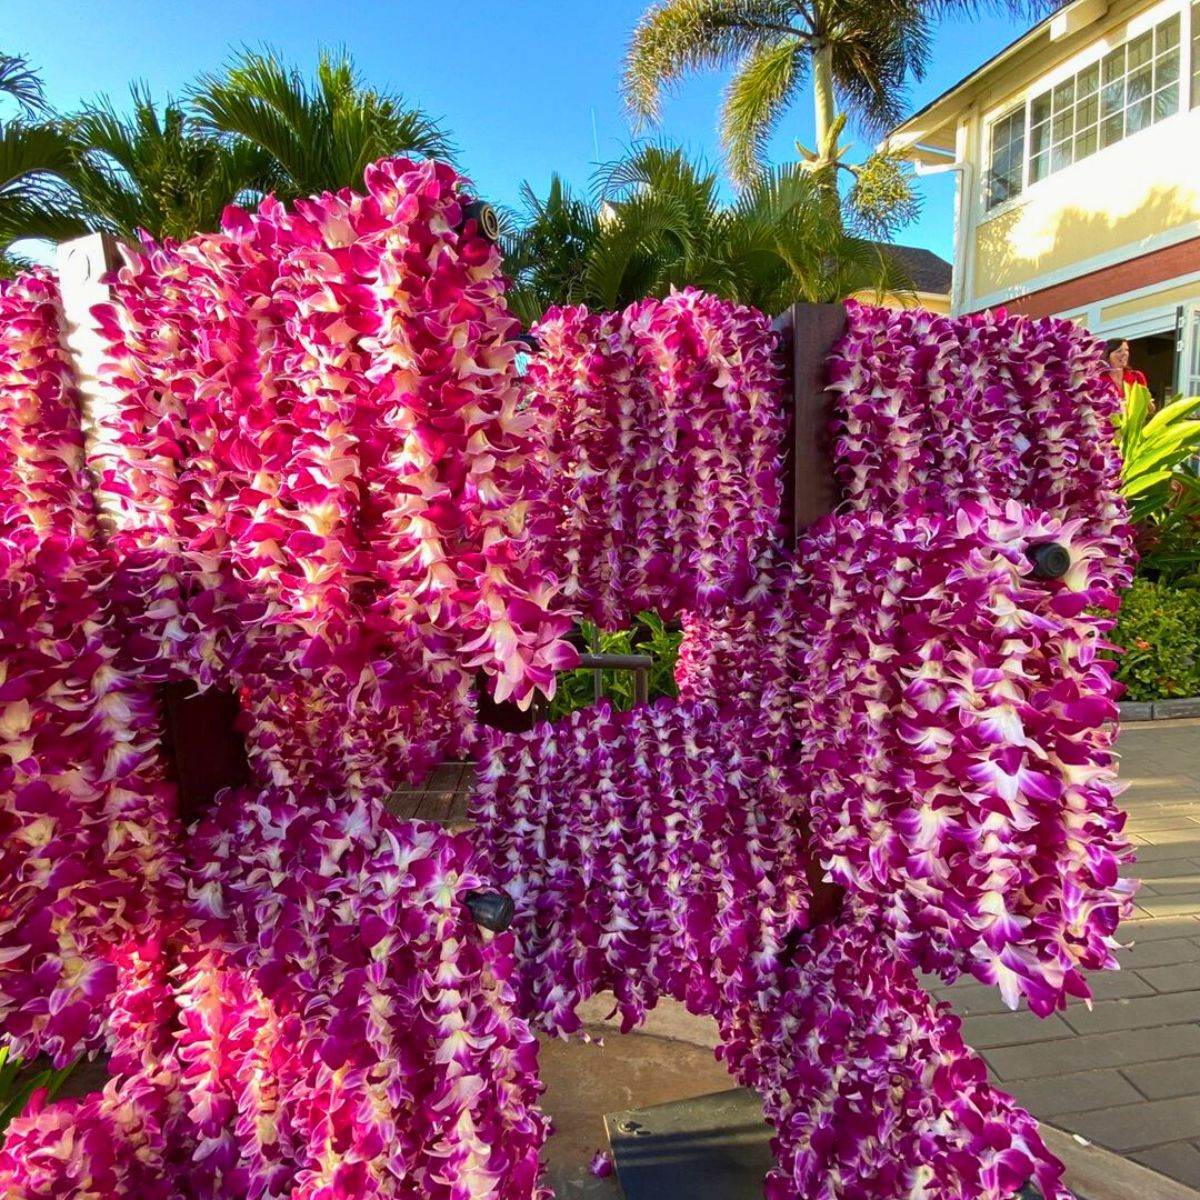 Orchid leis ready